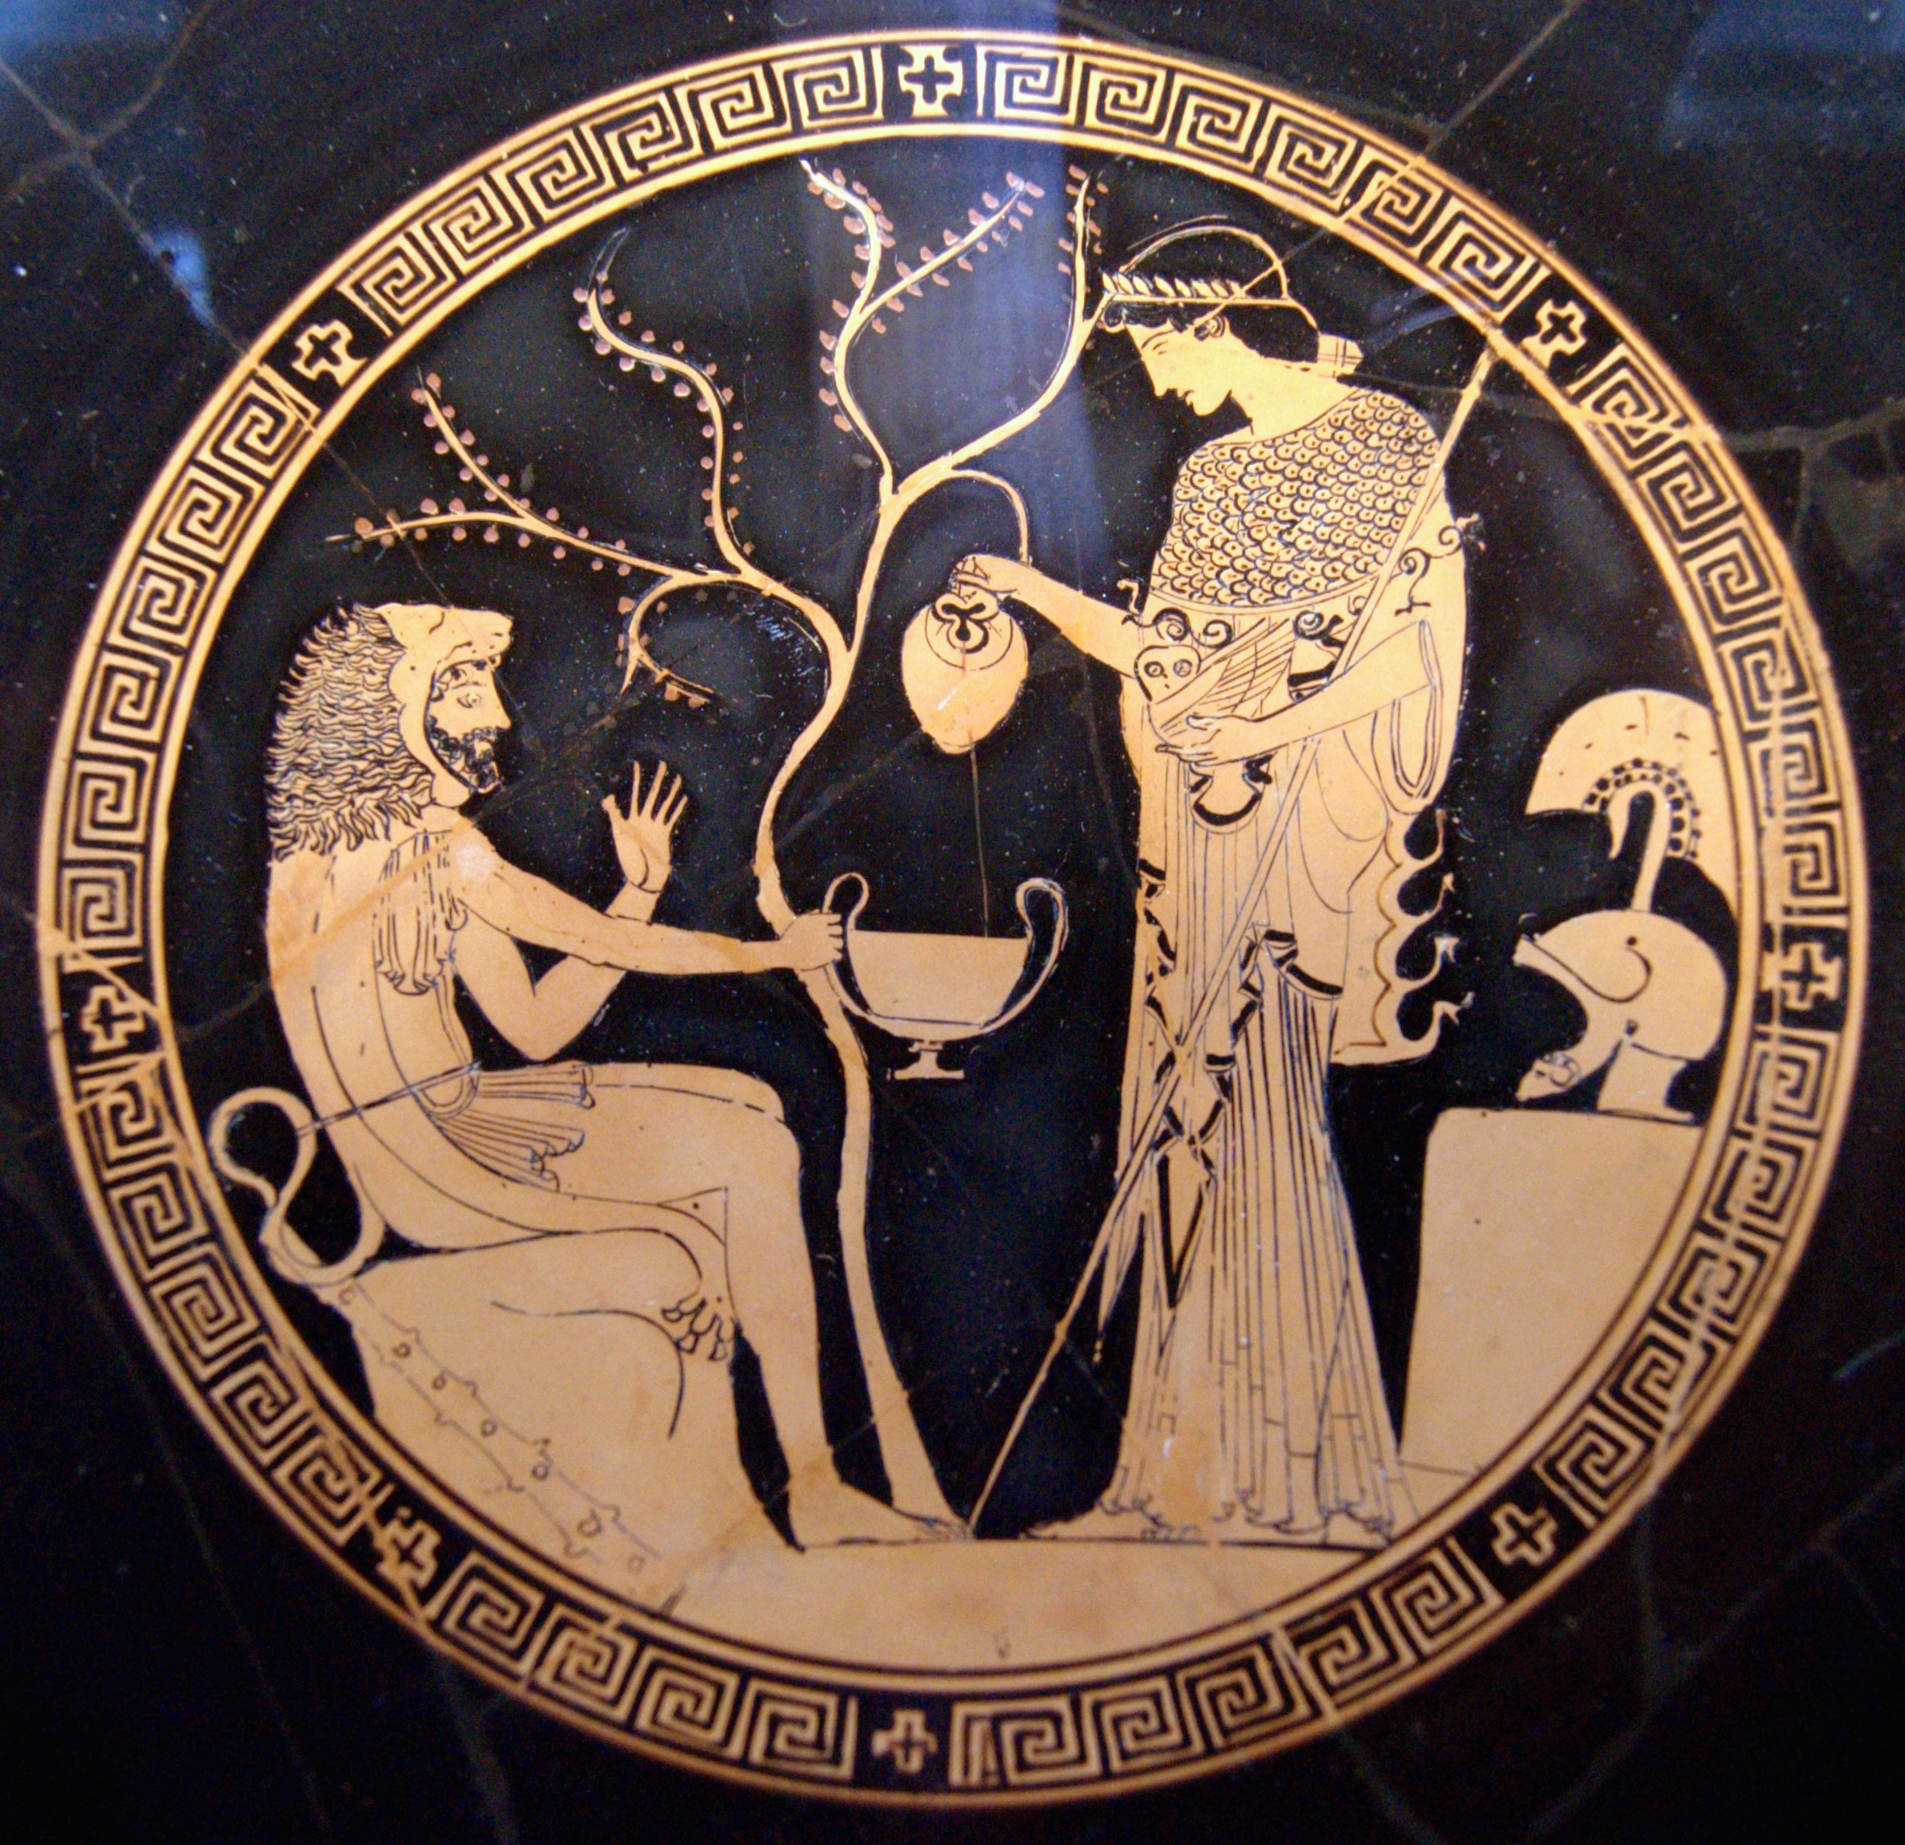 Heracles sits wearing his lion skin and holding a cup. Athena stands before him pouring a liquid into his cup. Athena is holding a spear, and her helm rests beside her.